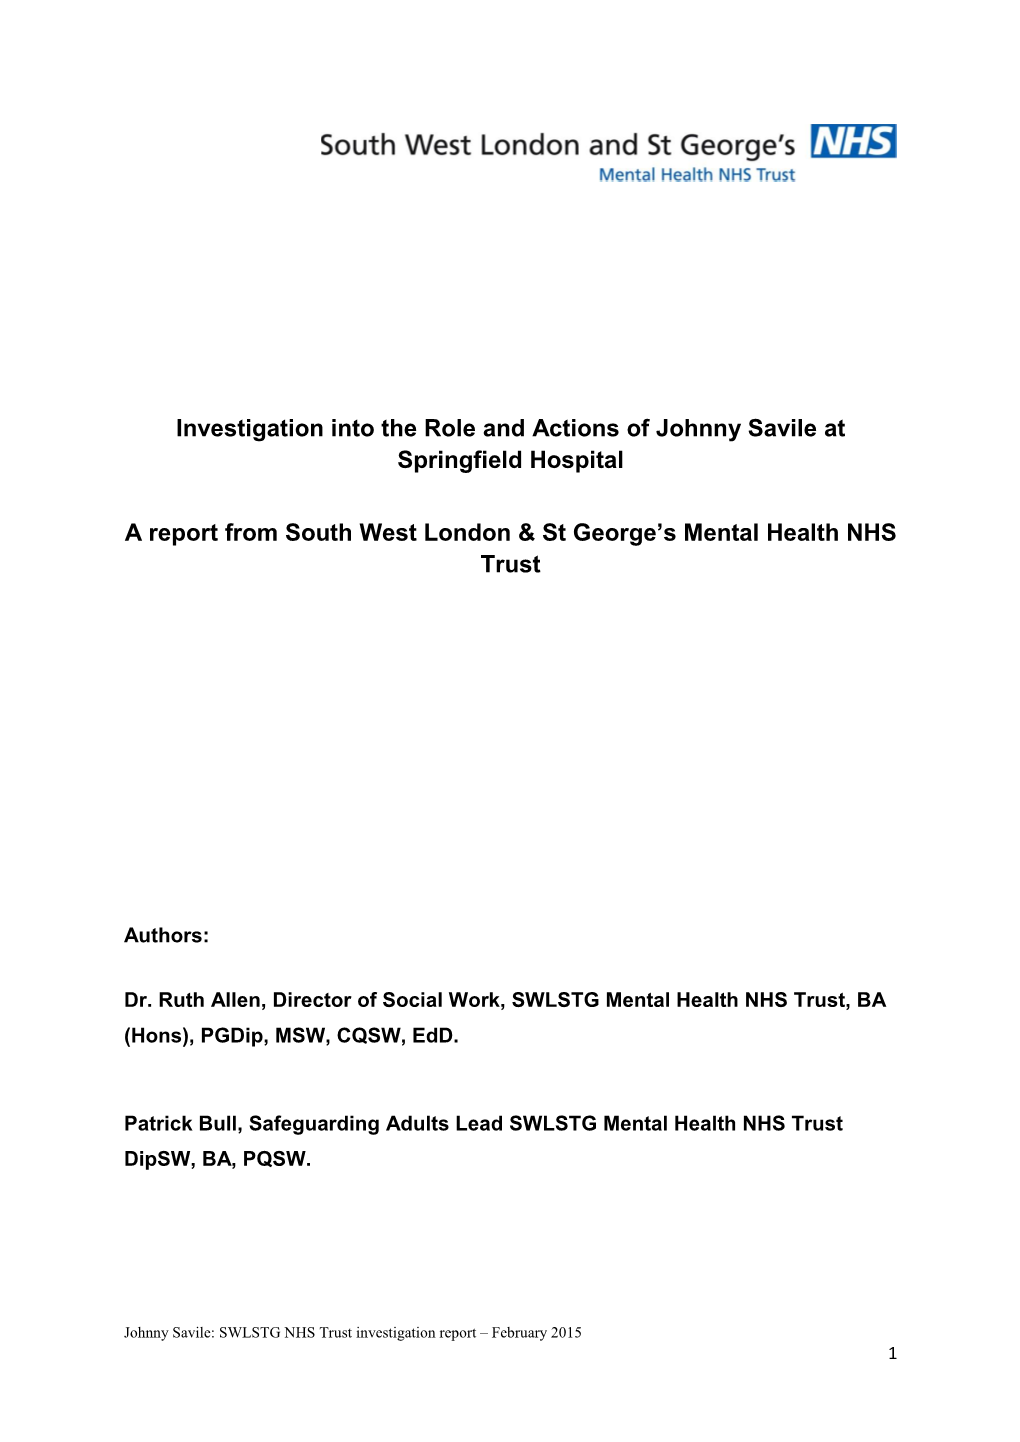 Investigation Into the Role and Actions of Johnny Savile at Springfield Hospital